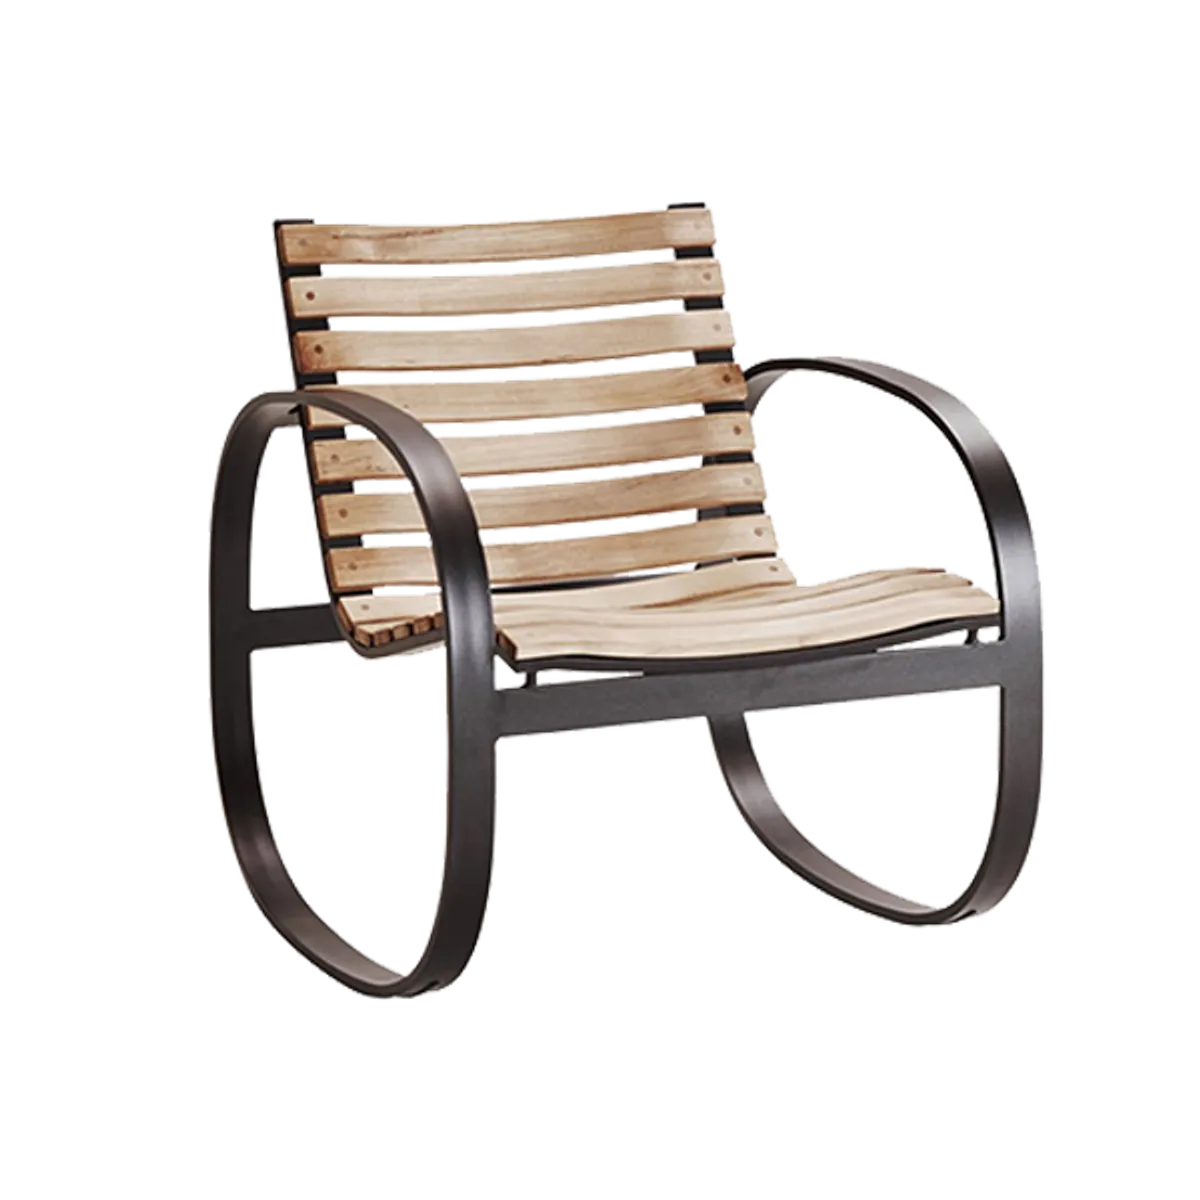 Web Outdoor Rocking Chair Wooden Slats Detail Insideoutcontracts 034